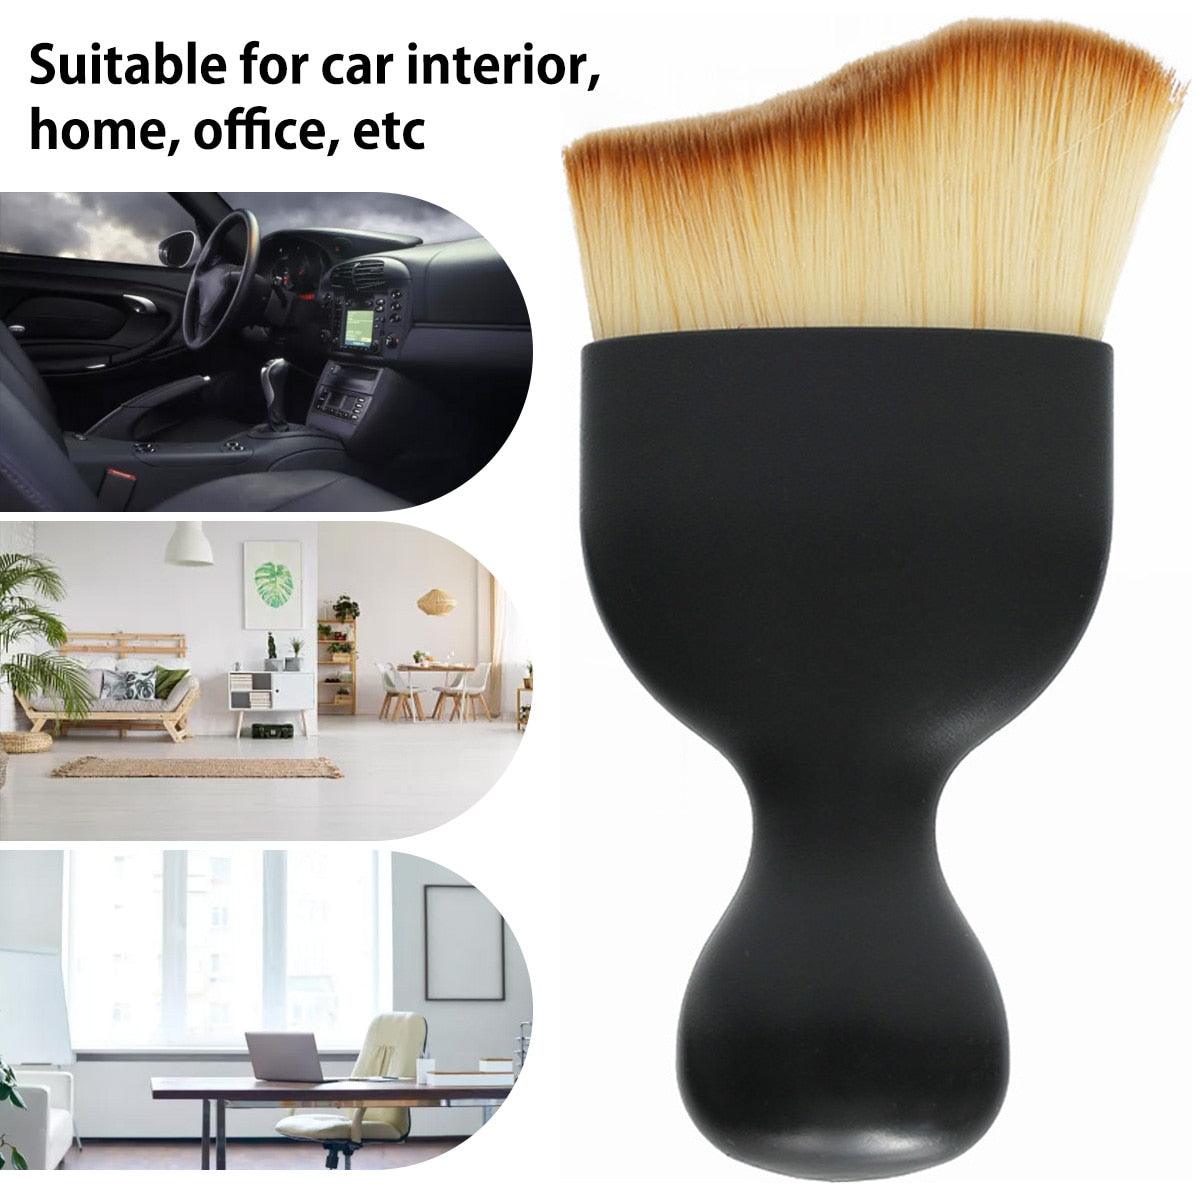 Car Interior Cleaning Soft Brush Dashboard Air Outlet Gap Dust Removal Detailing Brush Clean Tools Auto Maintenance - KinglyDay